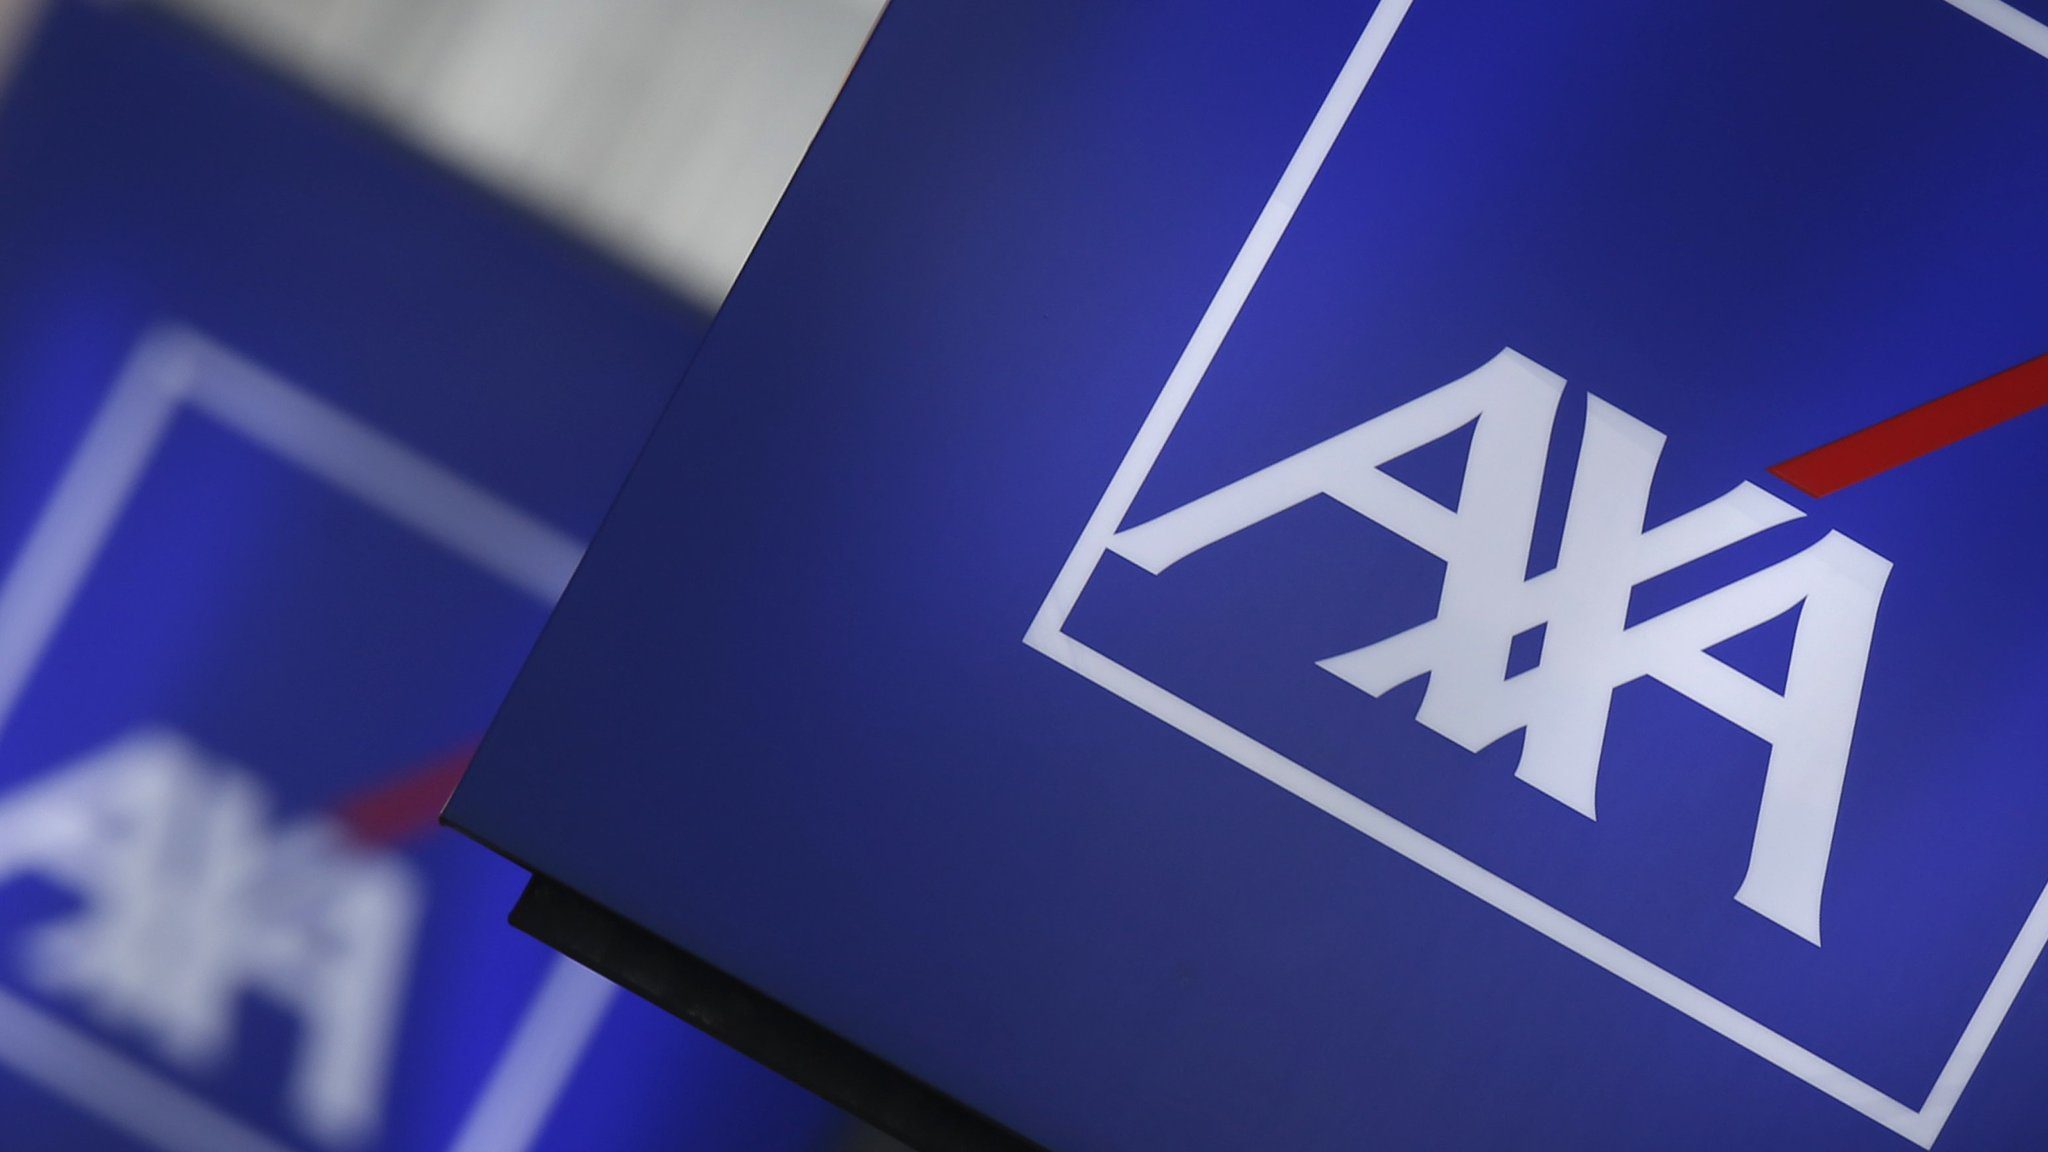 AXA INSURANCE INCREASES ASSETS BY 8%